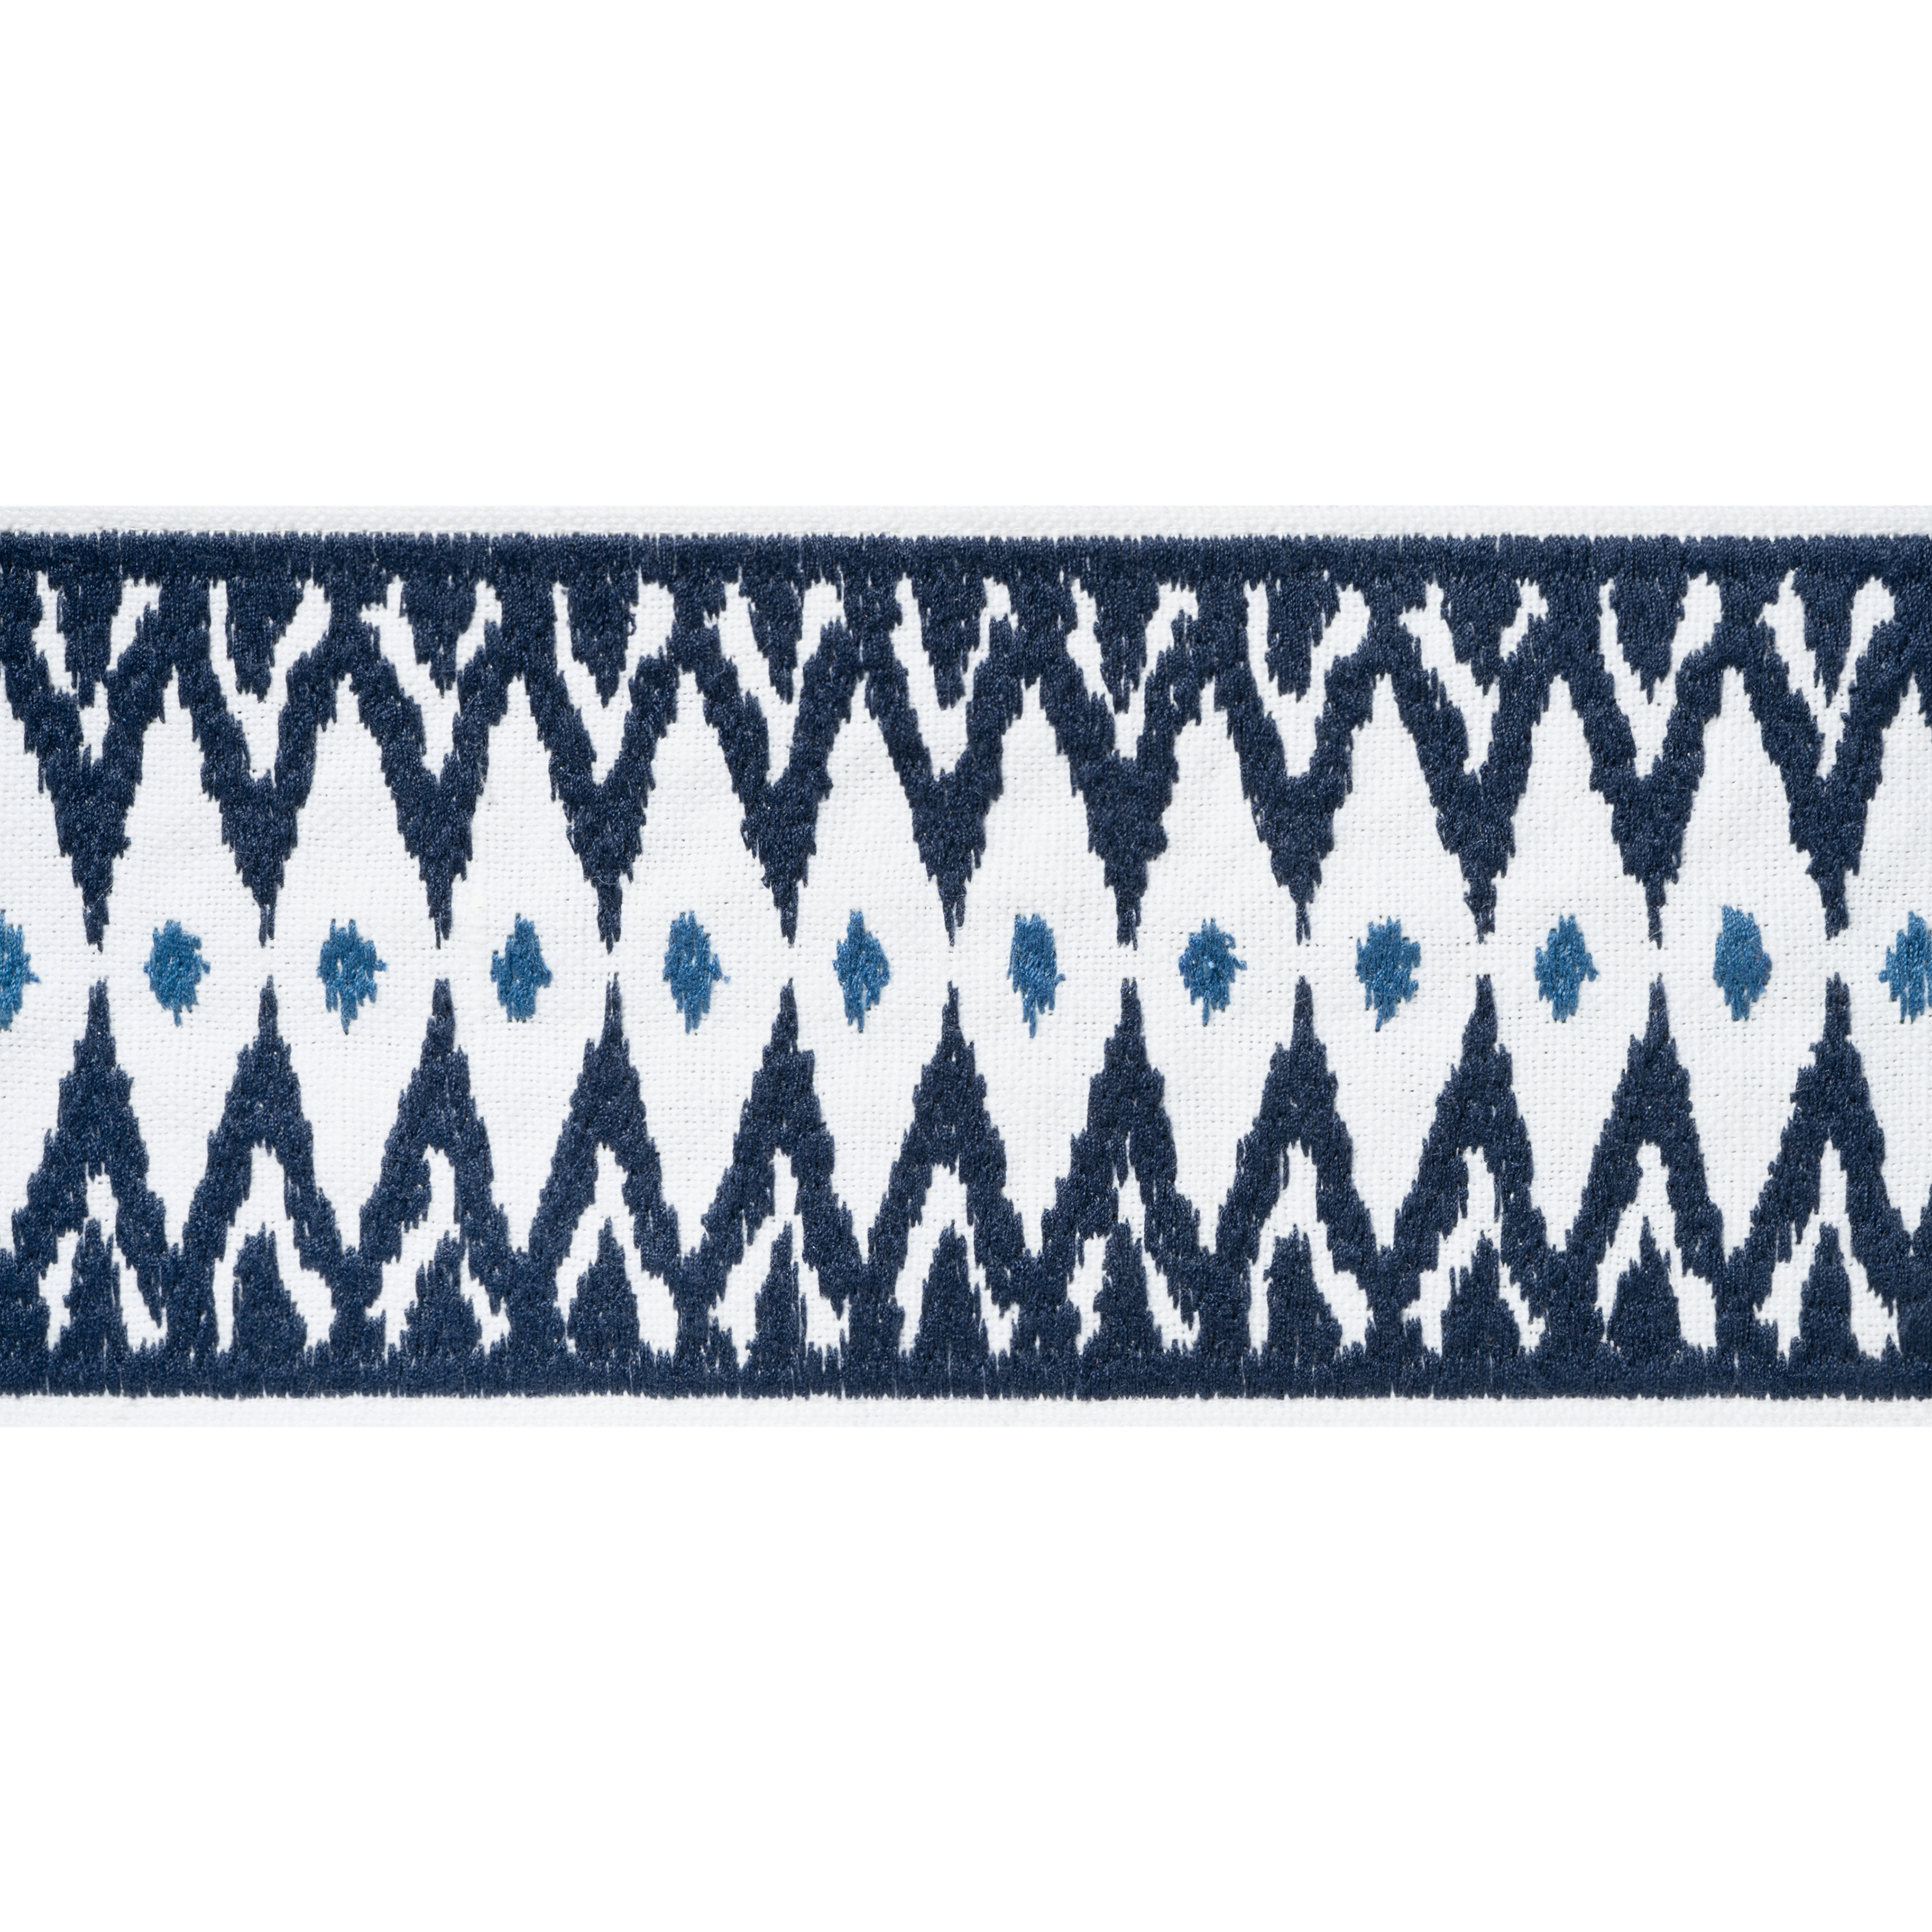 E12047 DELMONT TAPE Tapes and Navy collection & Thibaut the from Tapes Trims Volume Trims: 2